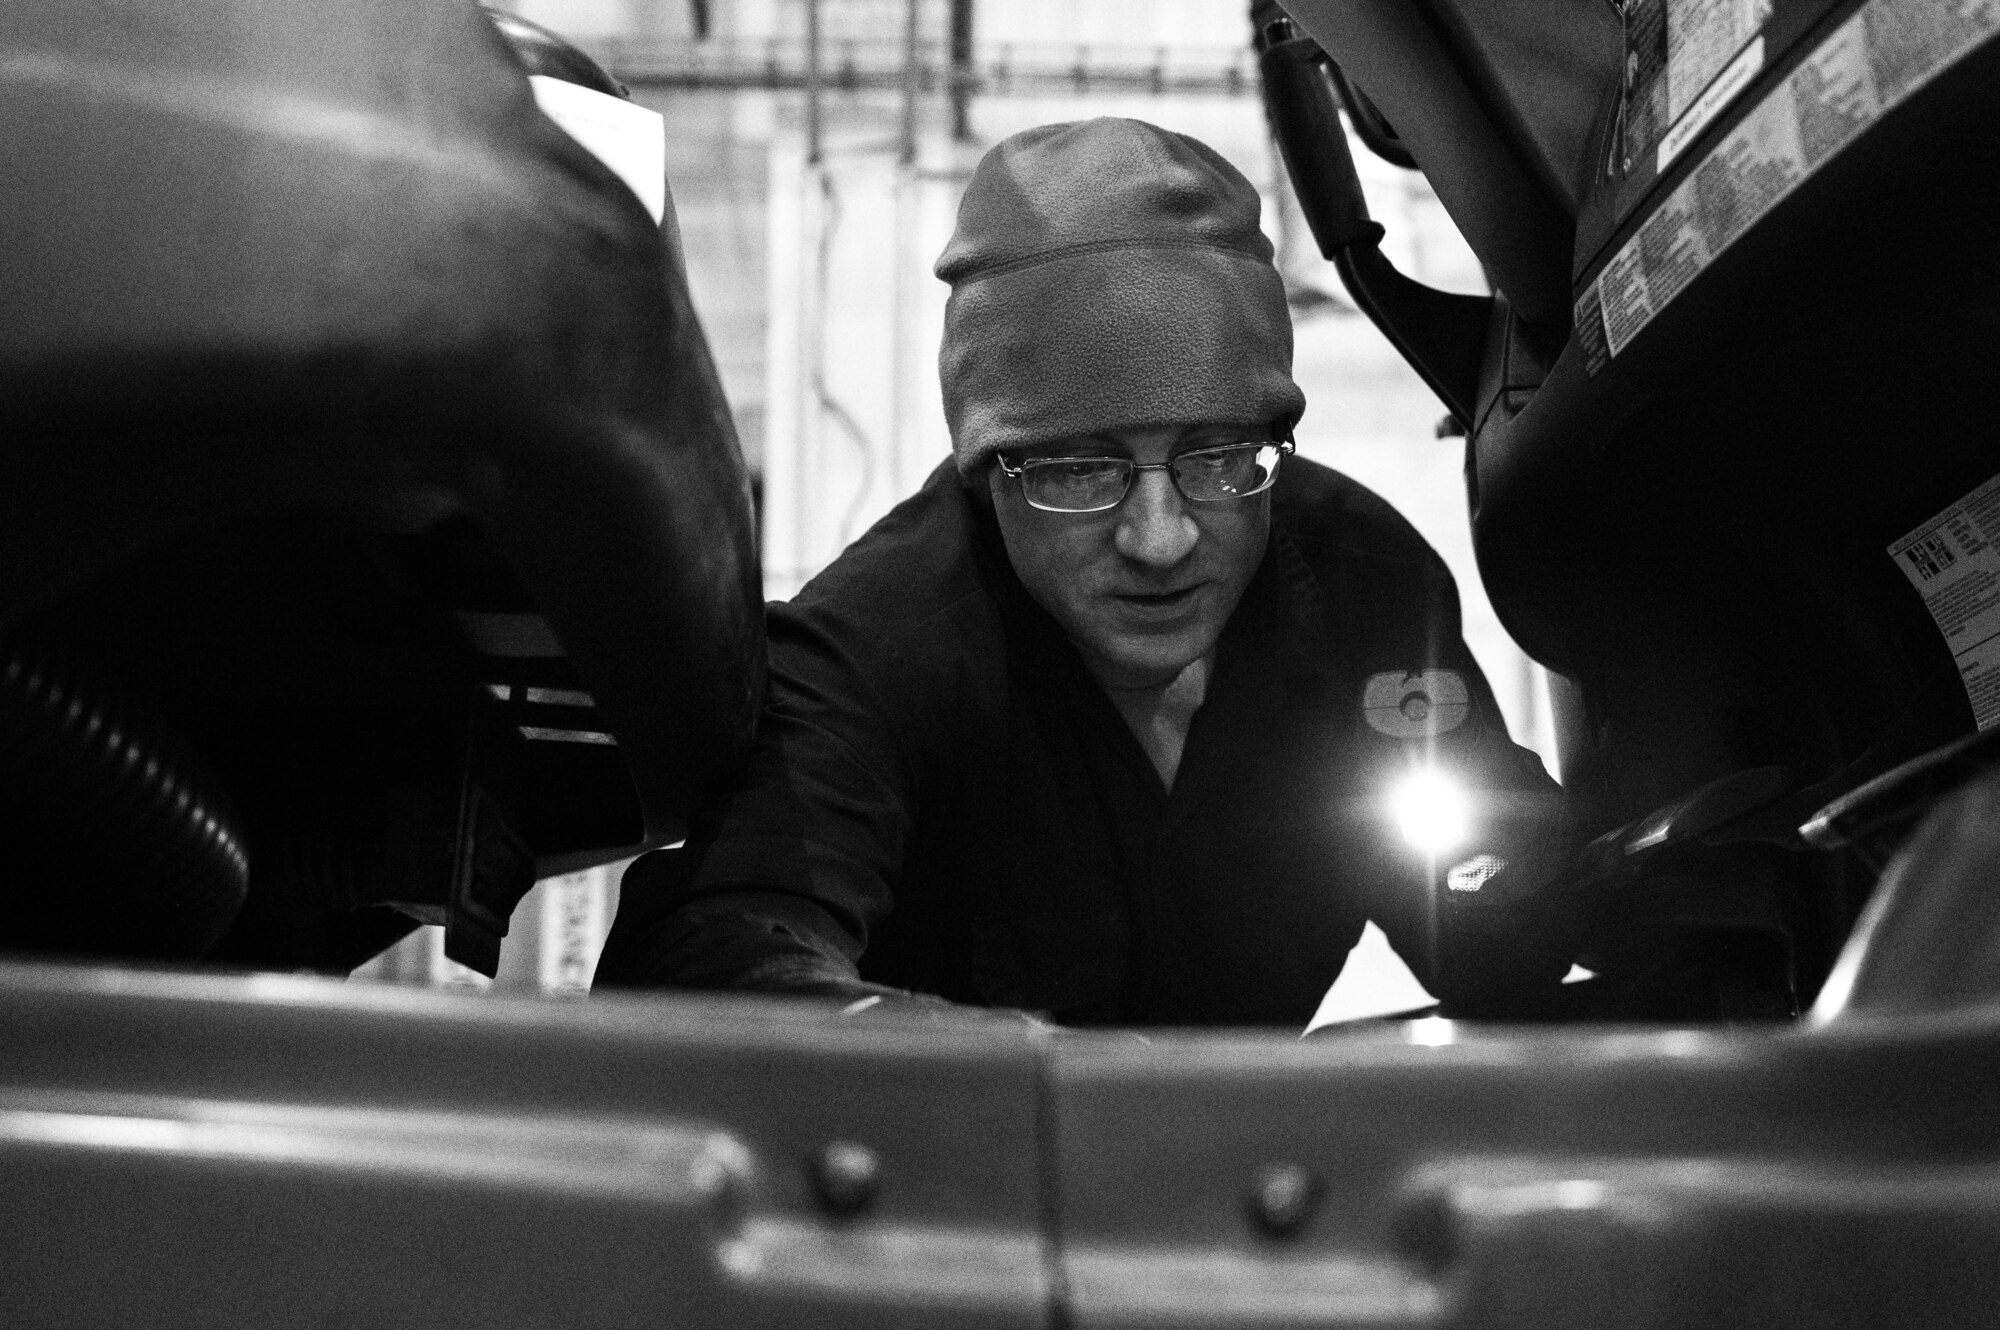 U.S. Air Force Staff Sgt. Daniel Payne, 100th Logistics Readiness Squadron NCO in charge of material handling equipment, repairs an electrical malfunction in a government vehicle at Royal Air Force Mildenhall, England, Jan. 9, 2023. Vehicle maintenance’s main objective is to service vehicles which are driven regularly on the flightline, so aircrews and maintainers can accomplish the mission. (U.S. Air Force photo by Airman 1st Class Viviam Chiu)